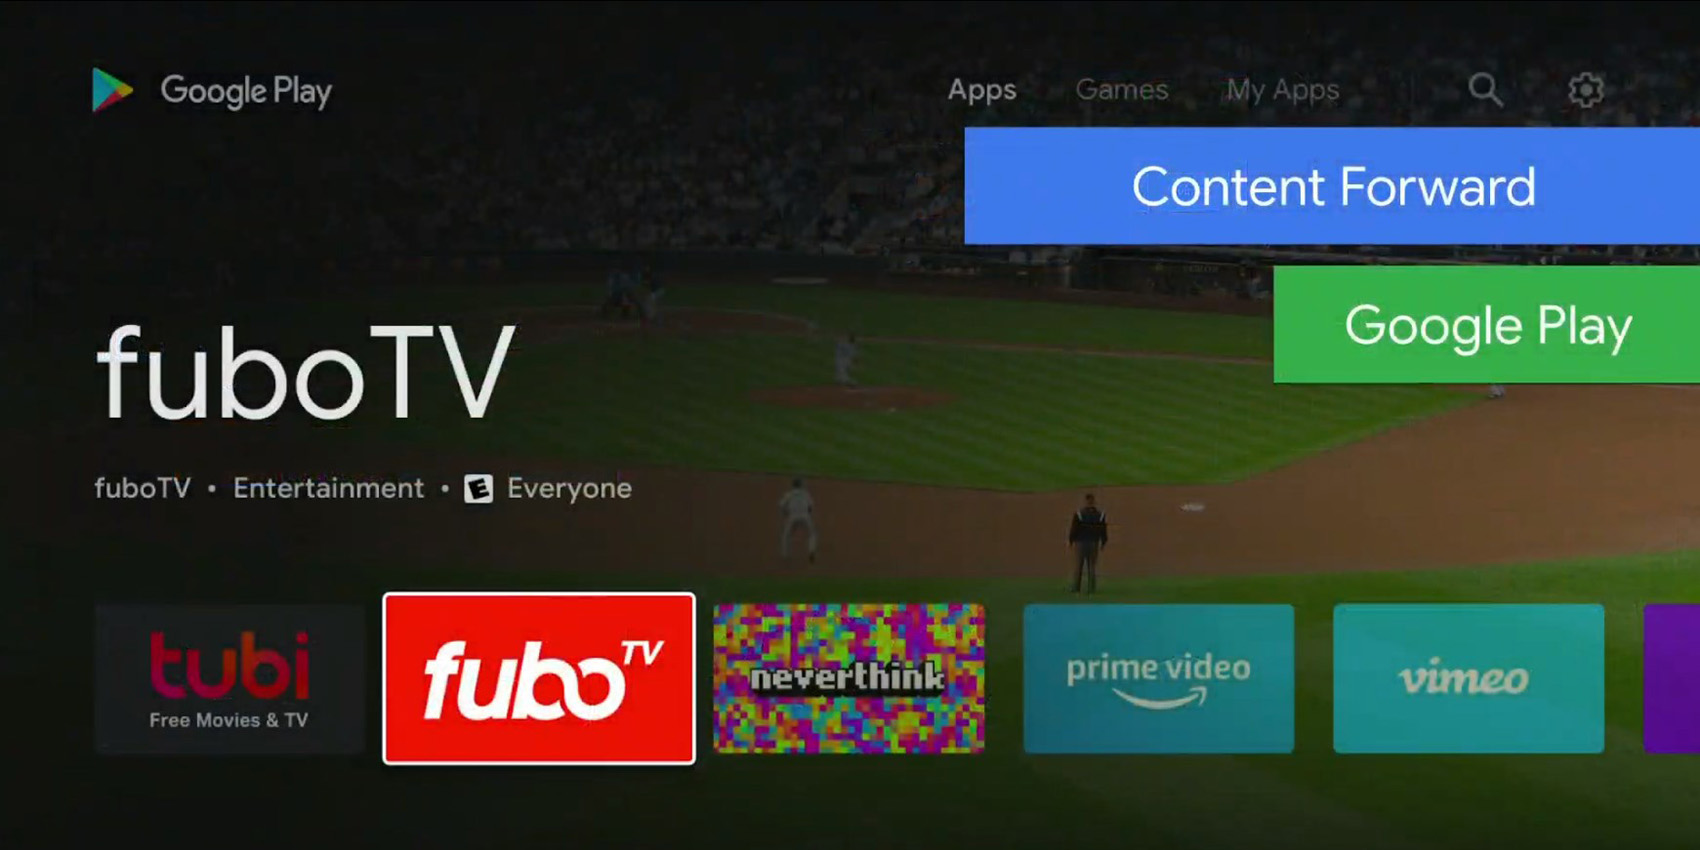 android tv play store apk download